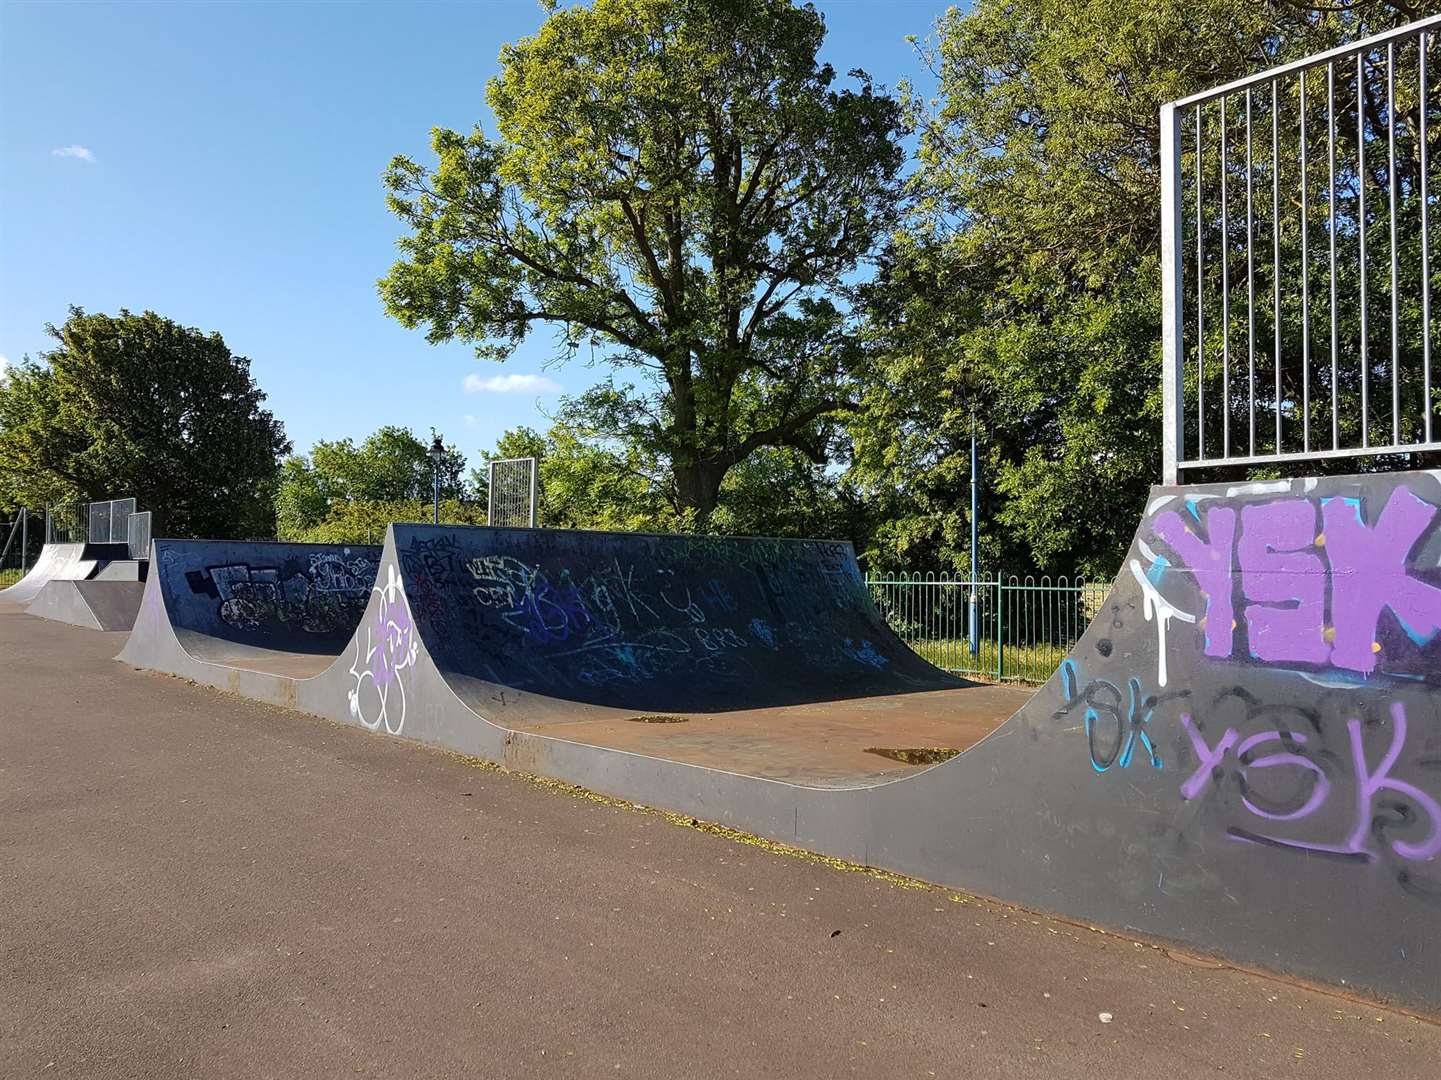 The exisiting facilities at Swanley skate park at St Mary's Recreation Ground (48329800)